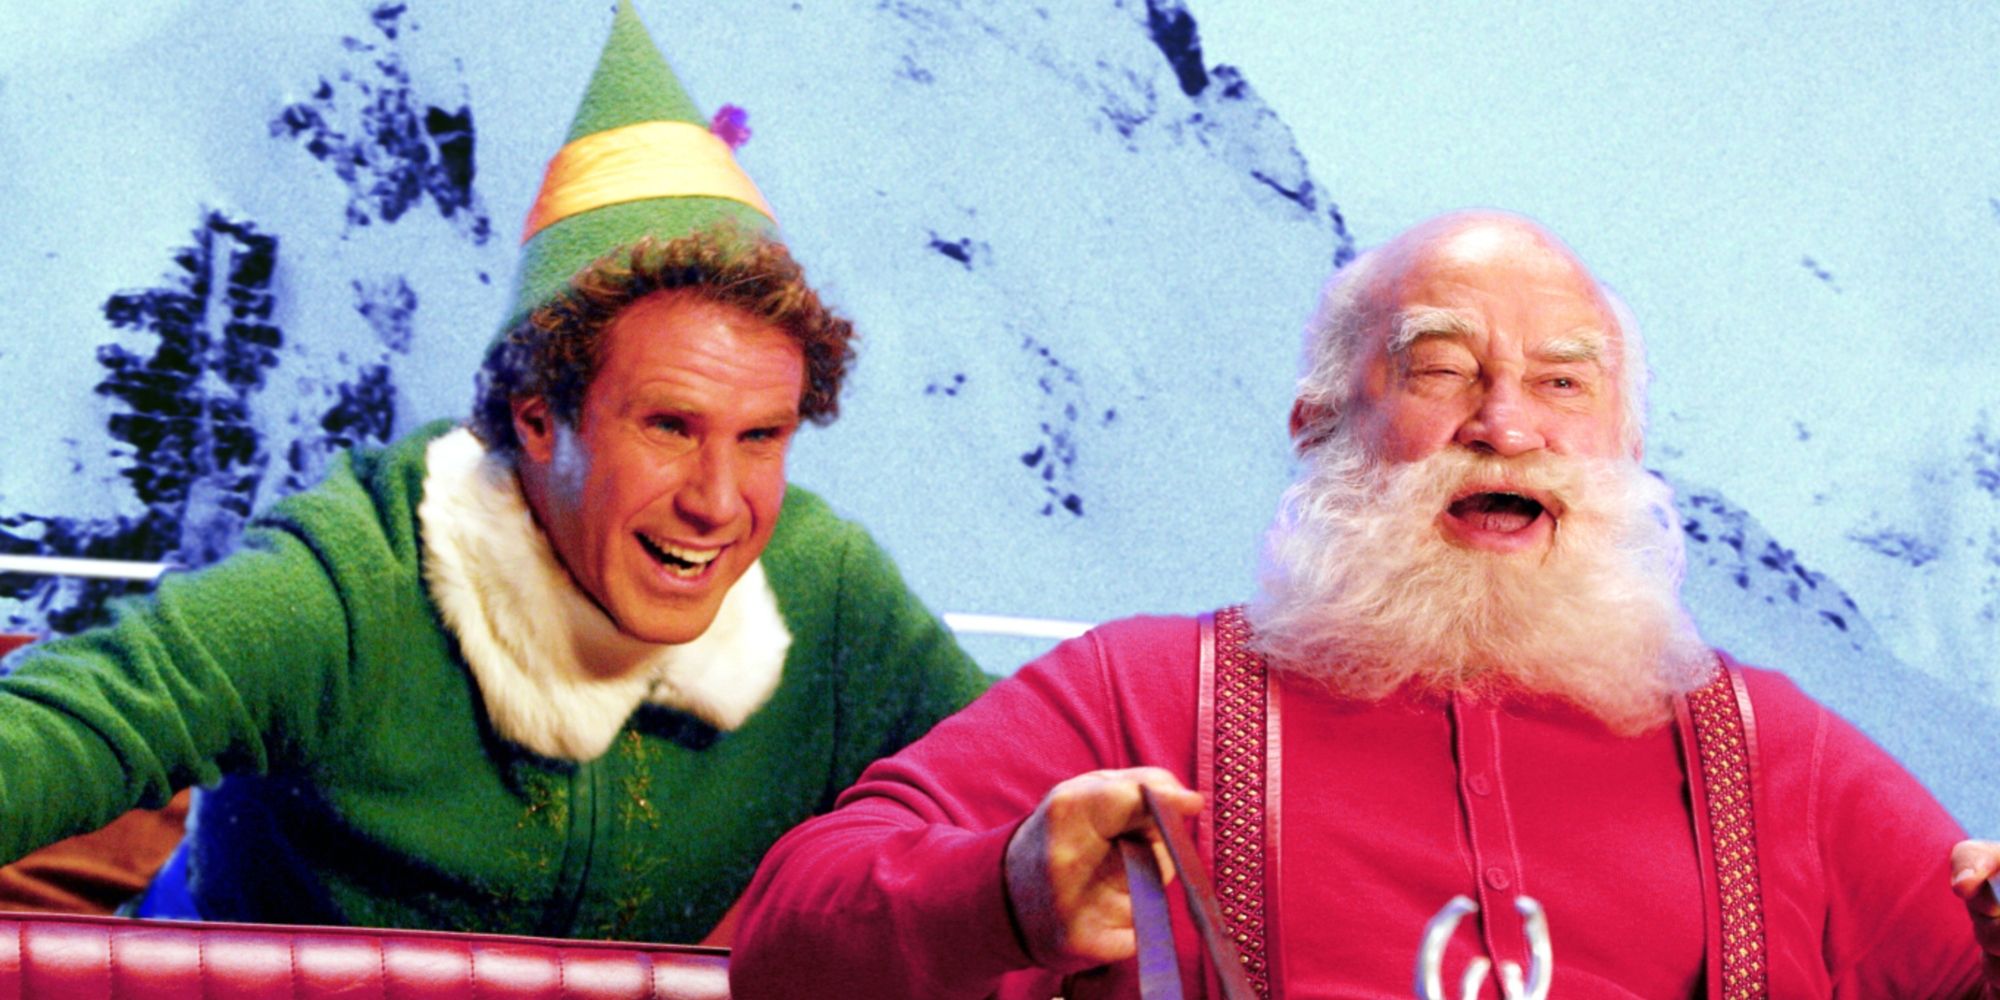 Ed Asner and Will Ferrell riding a sleigh through the north pole in Elf